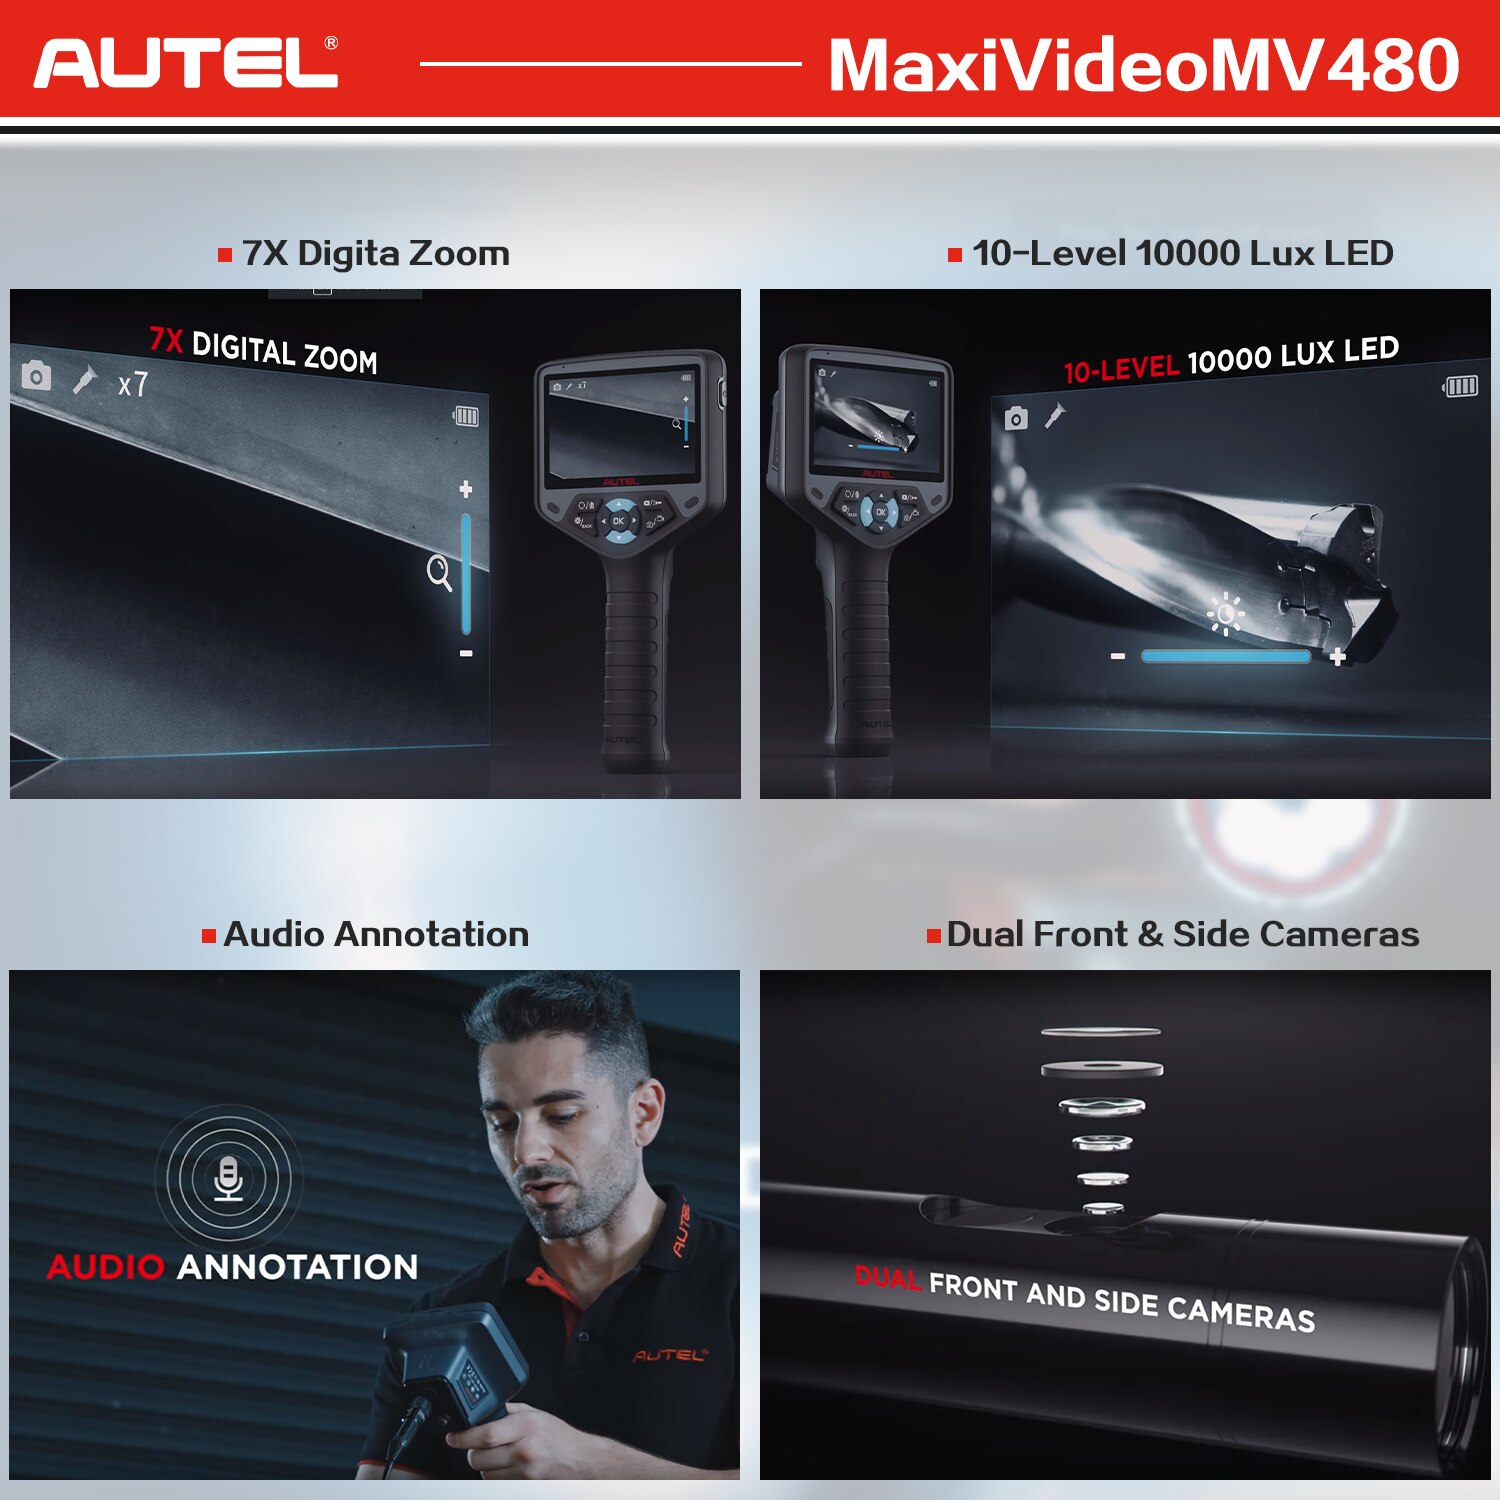 Autel MV480 Industrial Endoscope/Borescope,Dual Lens 8.5mm Inspection Camera with 7X Zoom,2MP,a Waterproof Cable,for Car/Wall